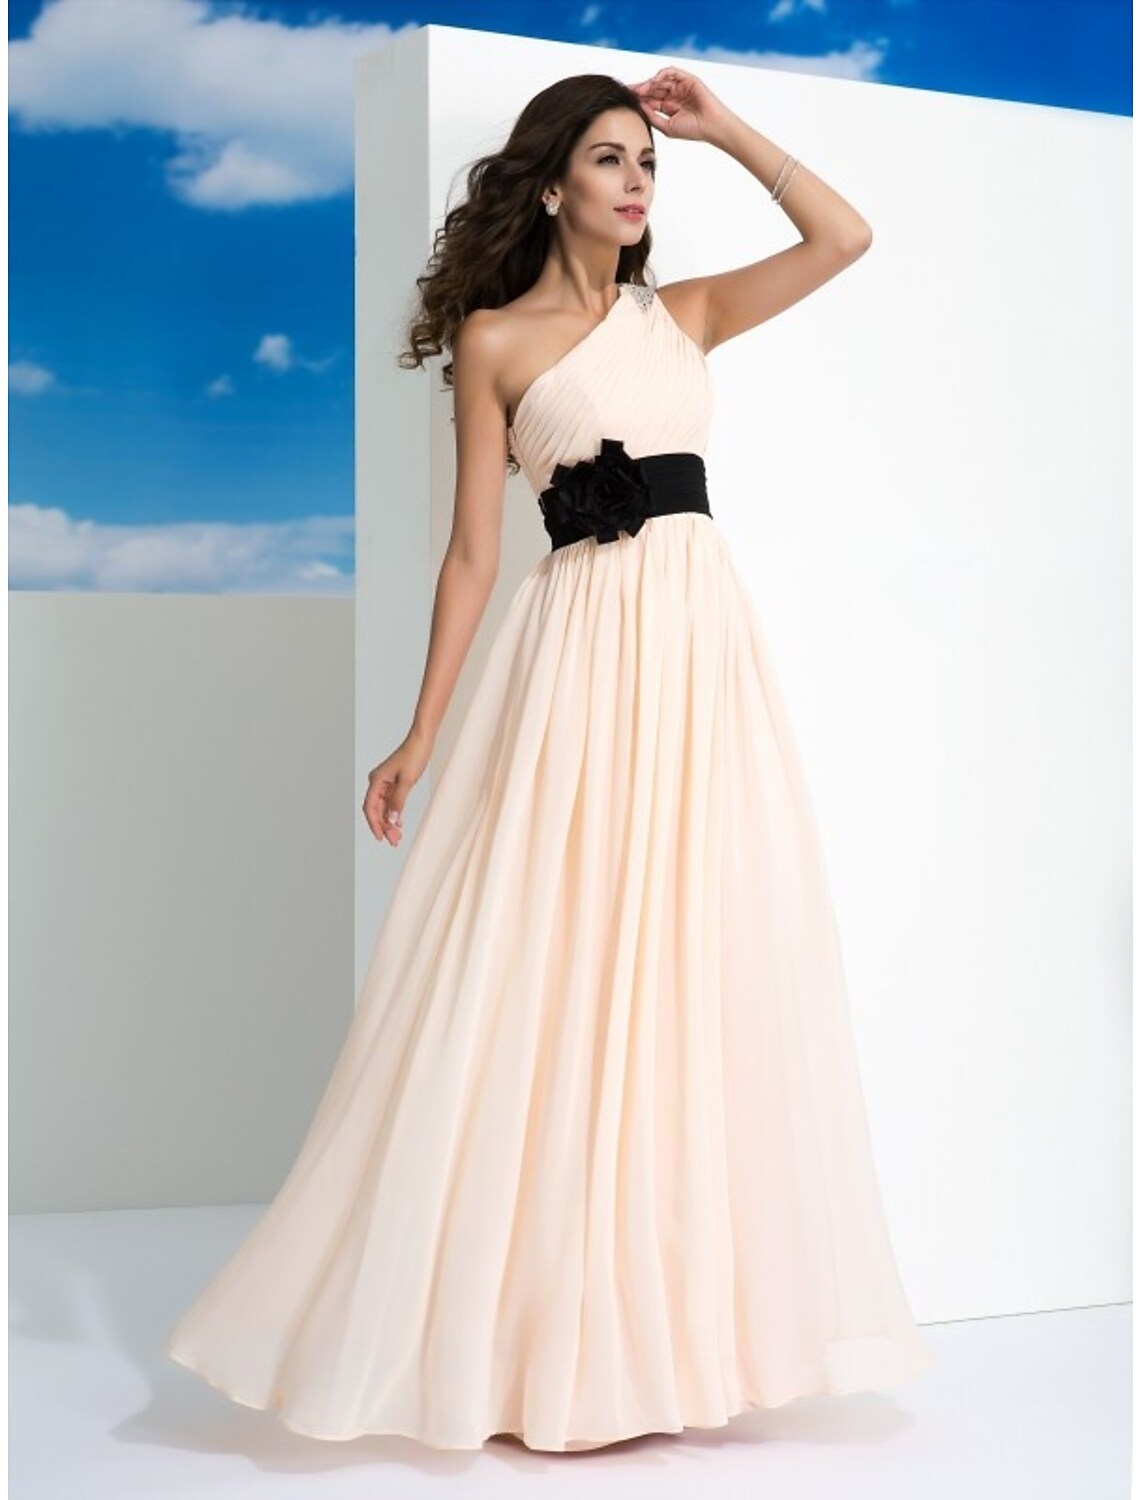 A-Line Prom Dresses Party Wear Floor Length Sleeveless One Shoulder Belt Sash Chiffon with Belt Ruched